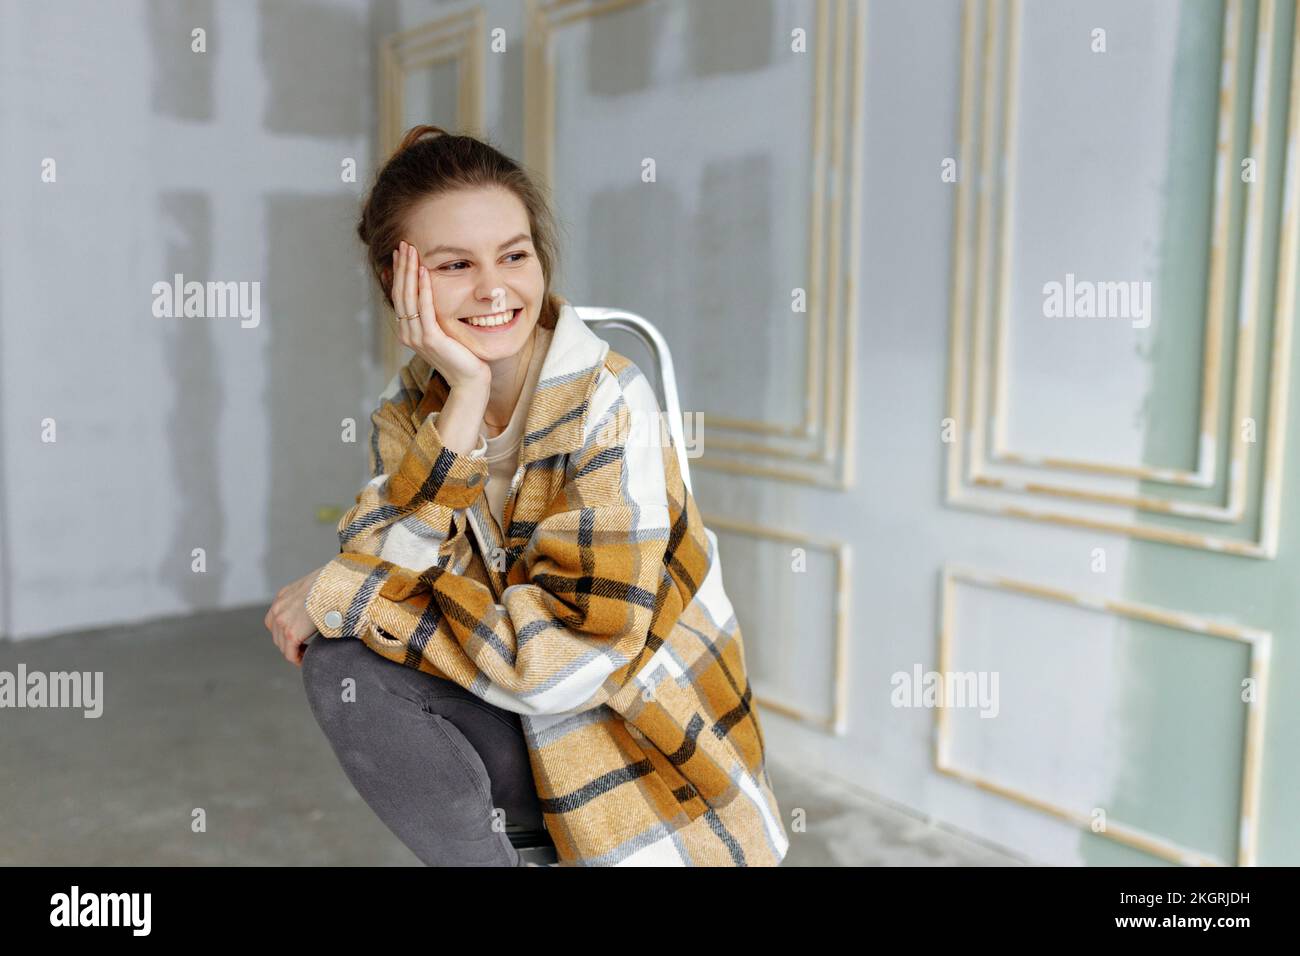 Smiling young woman in plaid shirt day dreaming with hand on chin in apartment Stock Photo